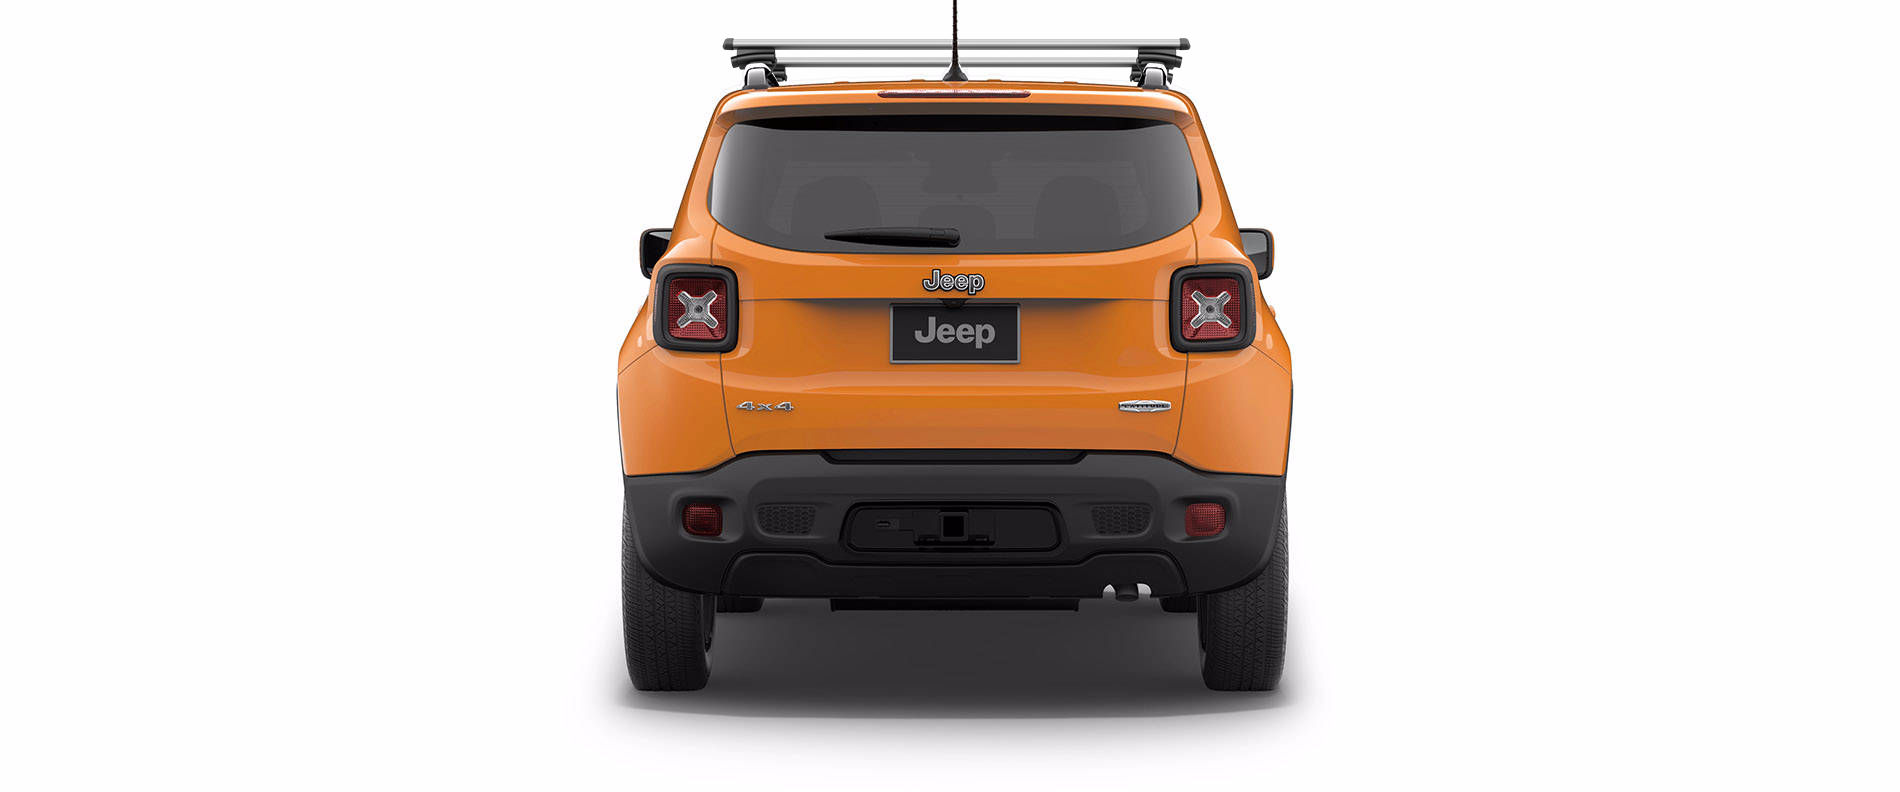 Jeep Renegade Sport FWD rear view